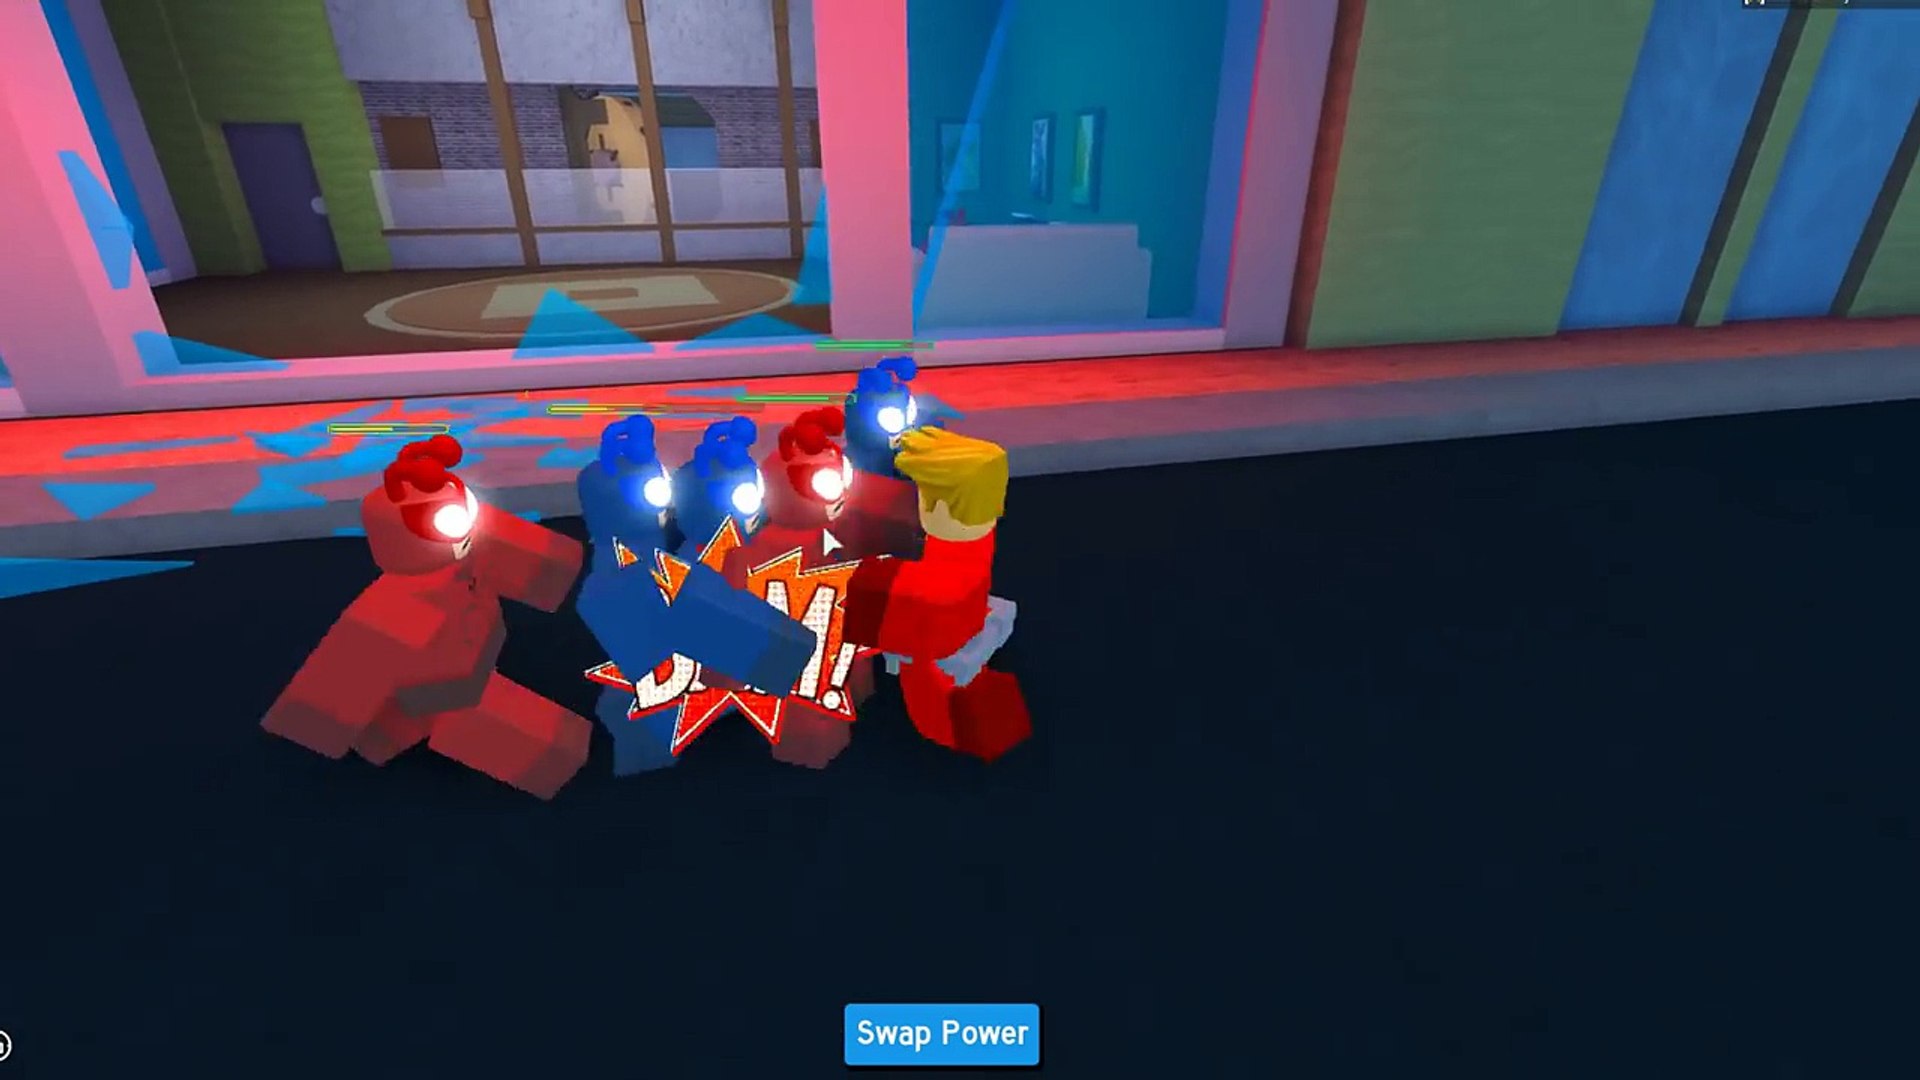 Roblox Lets Play Murder Mystery 2 Radiojh Games Gamer Chad Slg 2020 - roblox heroes of robloxia missions 1 2 3 youtube